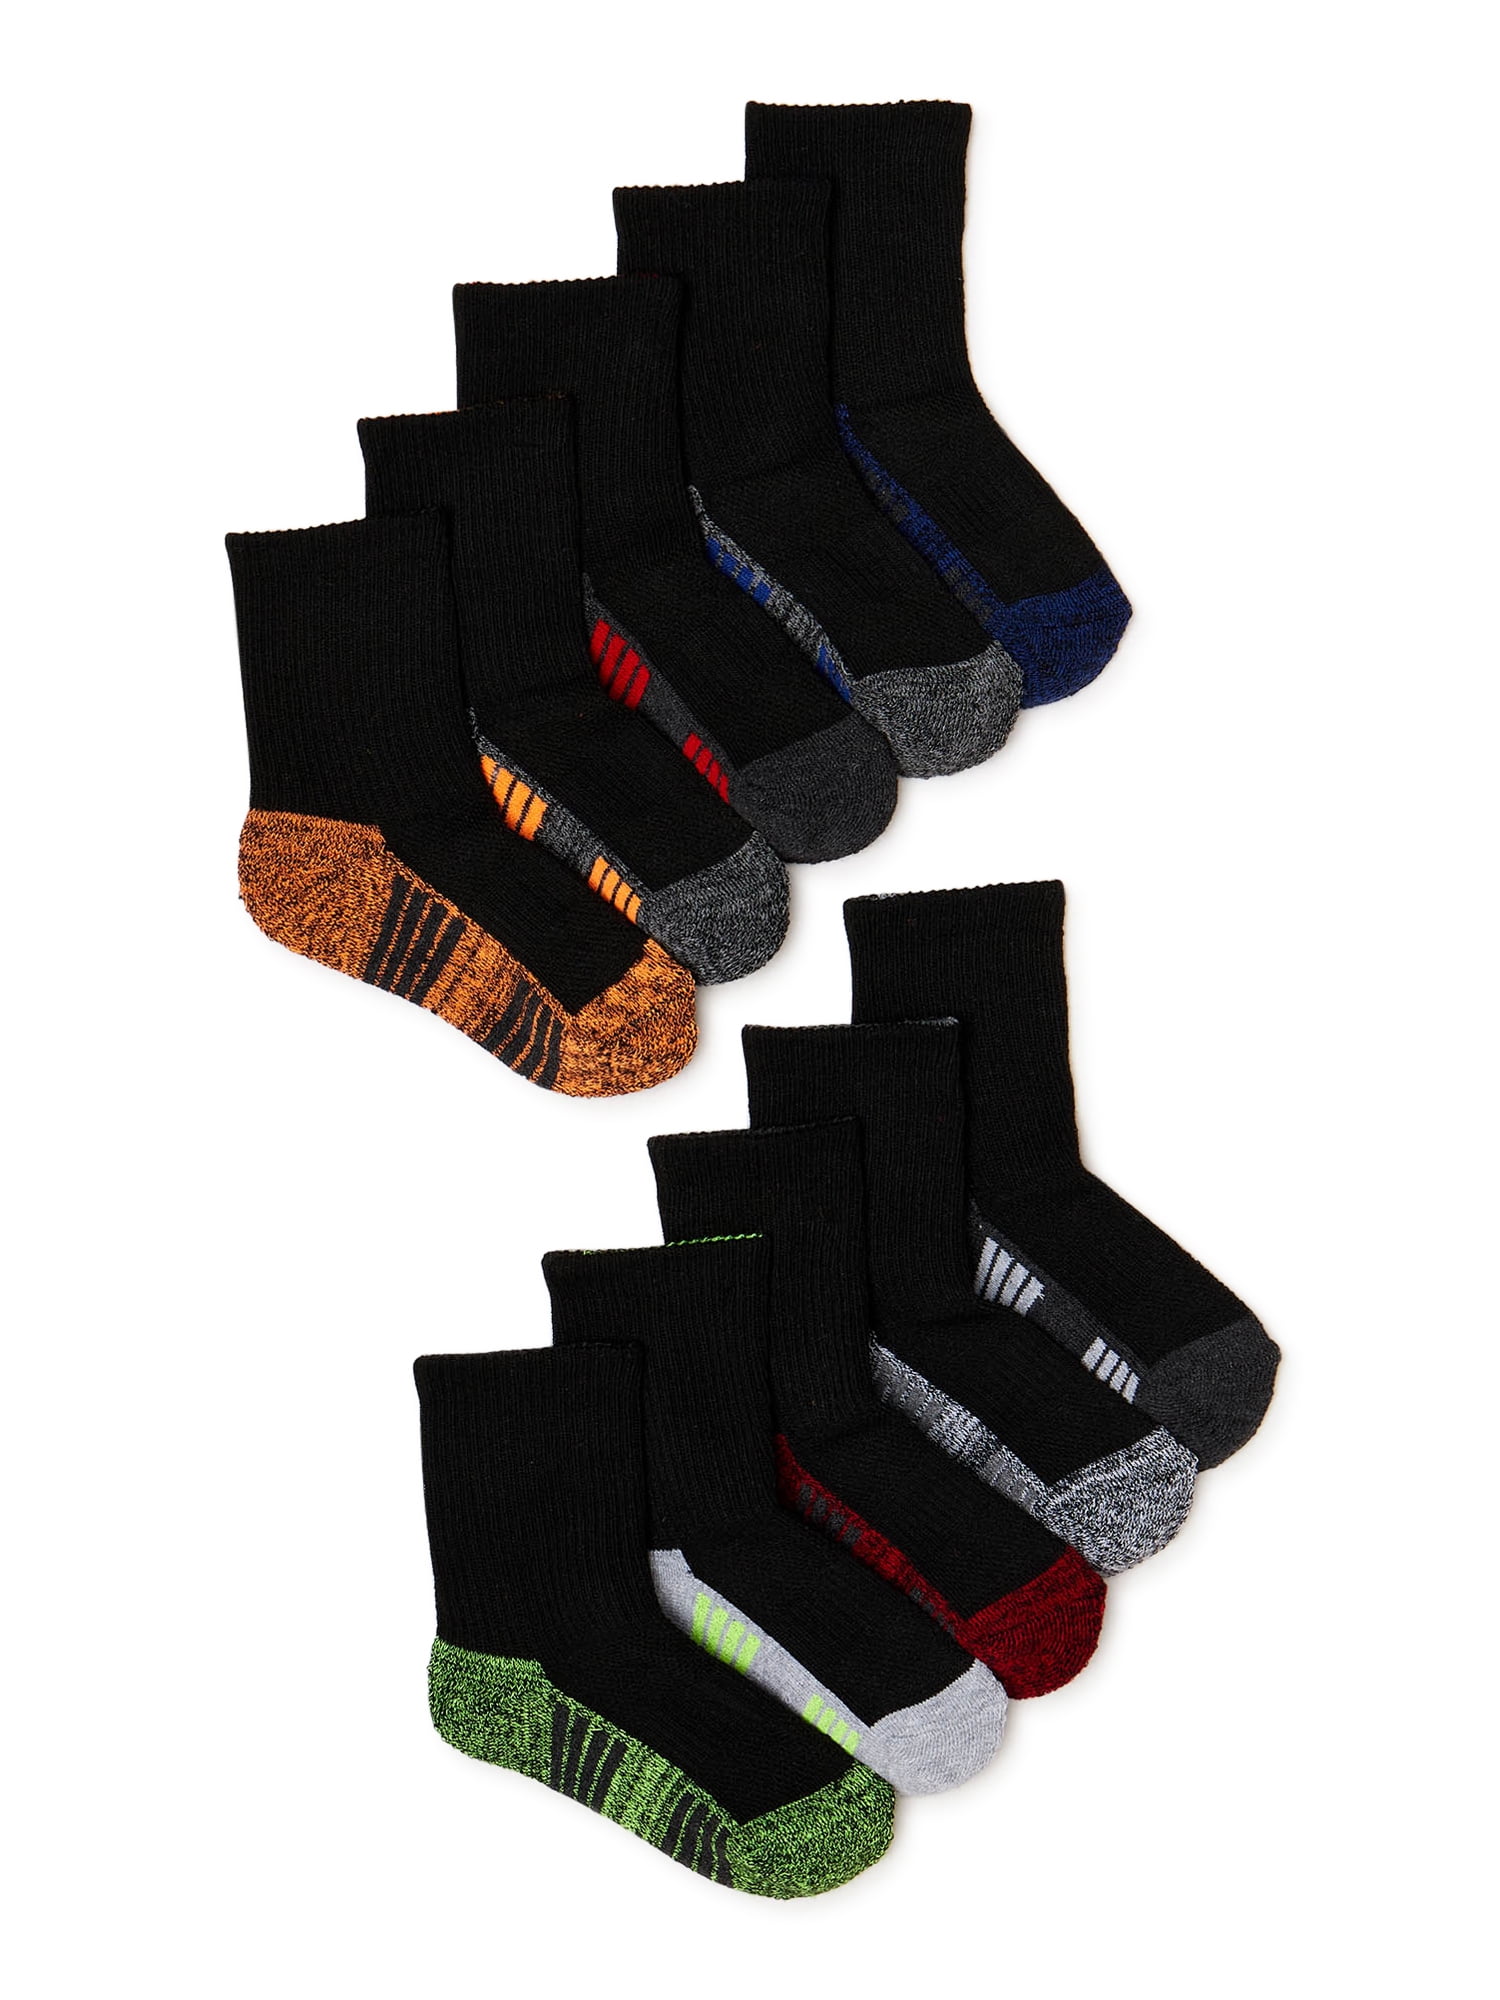 Connecticut State Flag Printed Crew Socks Warm Over Boots Stocking Trendy Warm Sports Socks